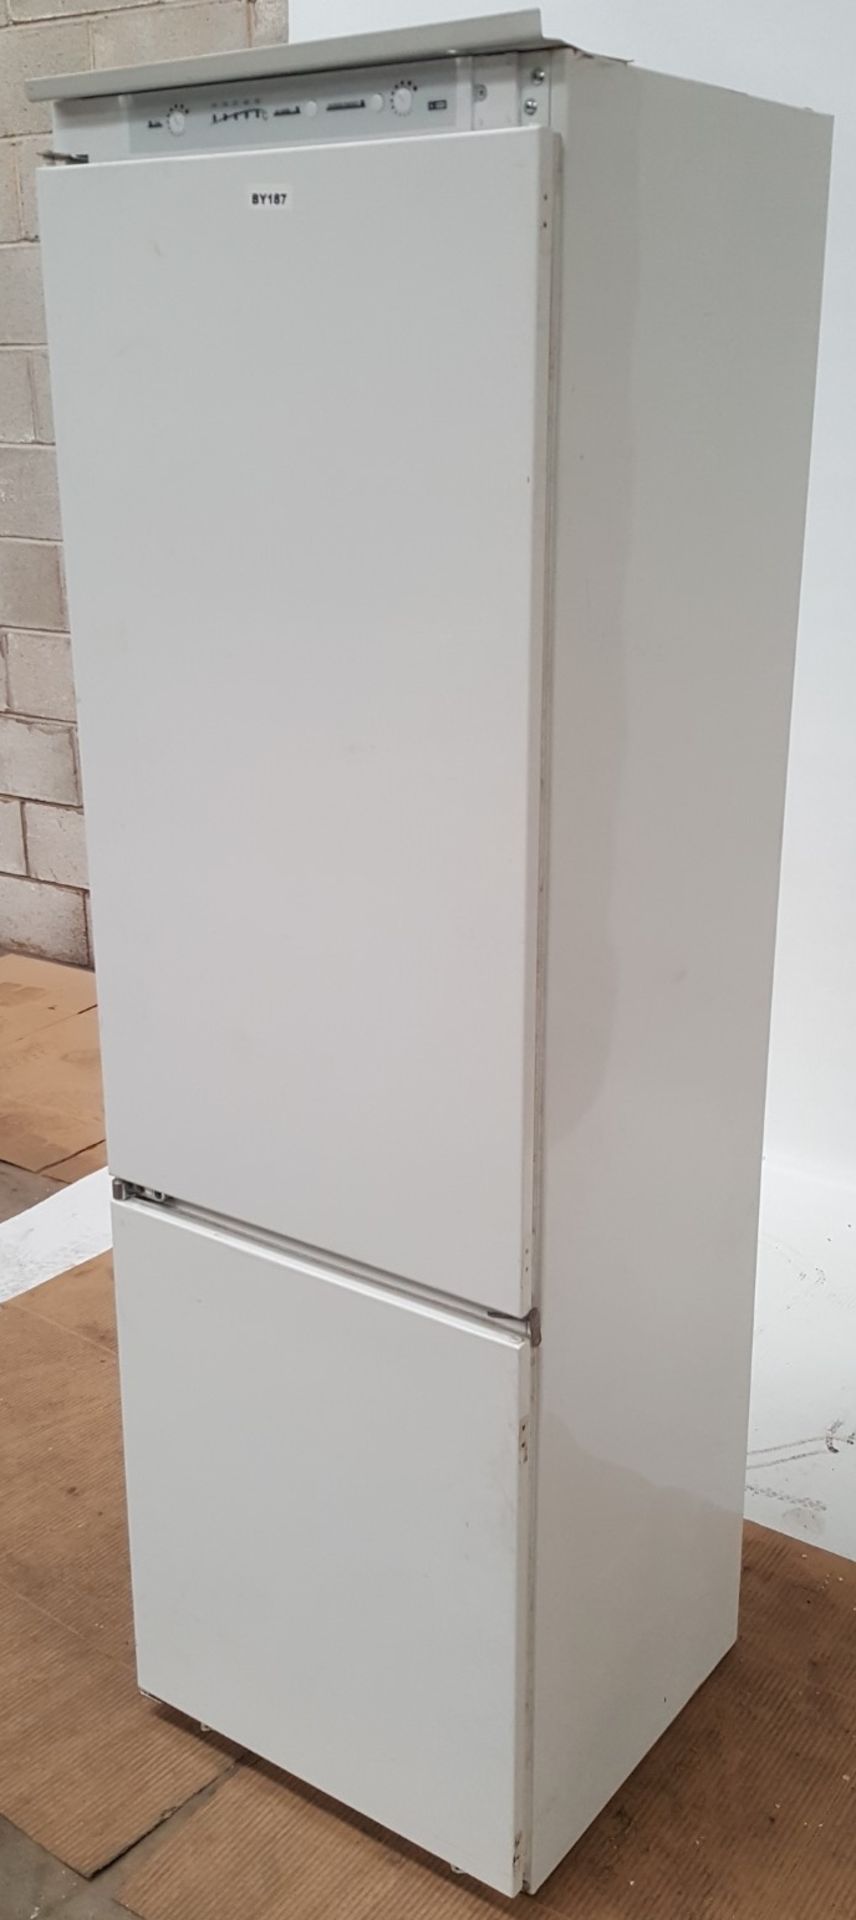 1 x Prima Integrated 70/30 Frost Free Fridge Freezer LPR472A1 - Ref BY187 - Image 4 of 6